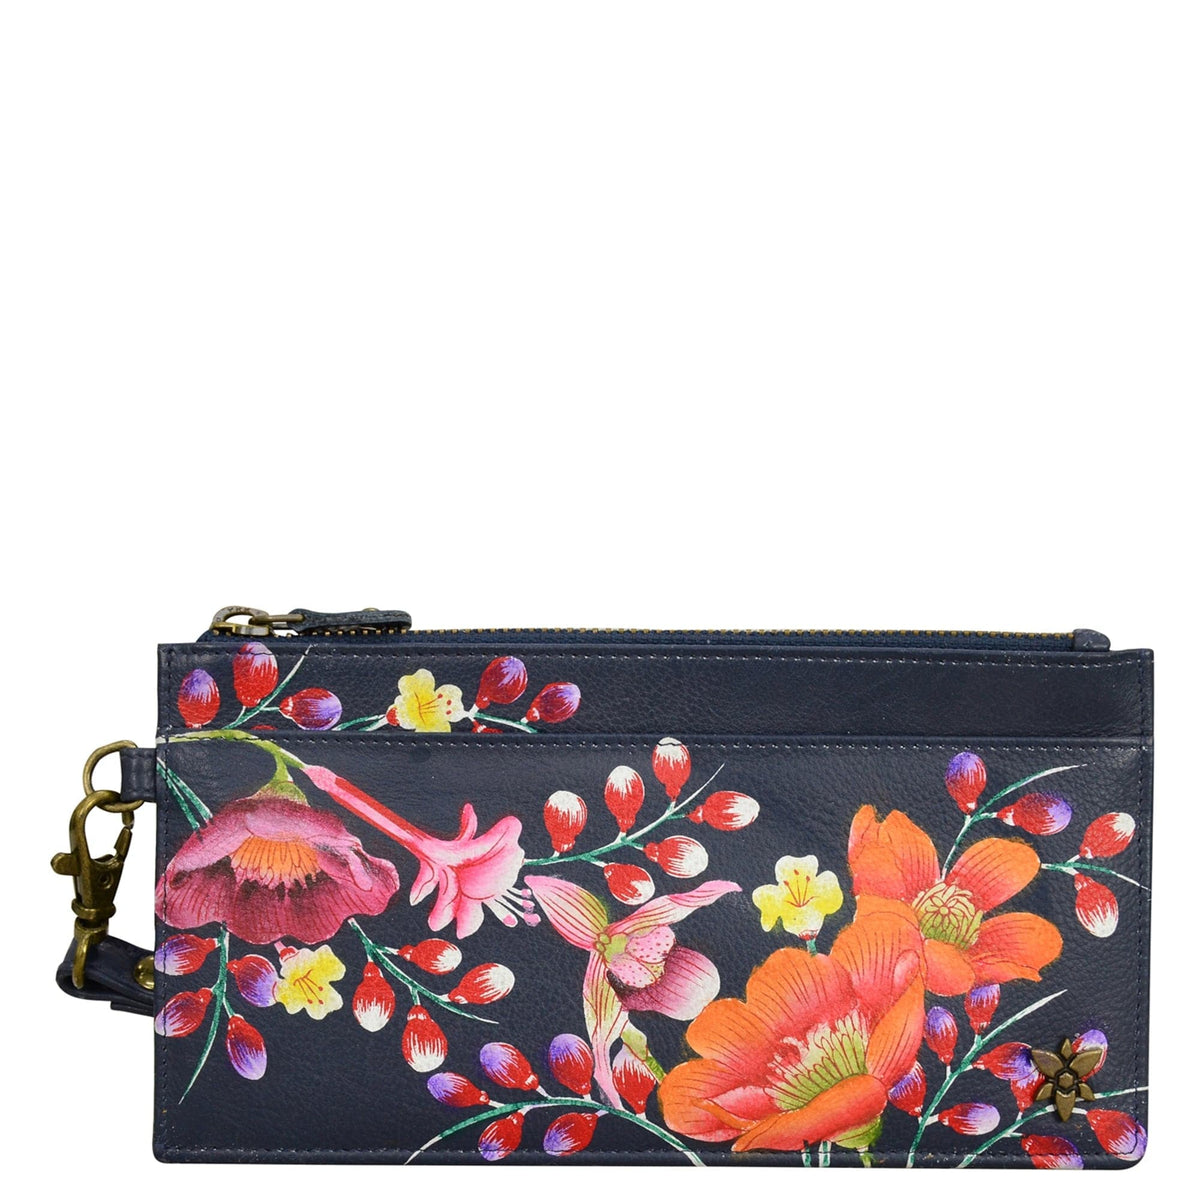 Buy Moonlit Meadow Leather Hand Painted Clutch wristlet organizer ...